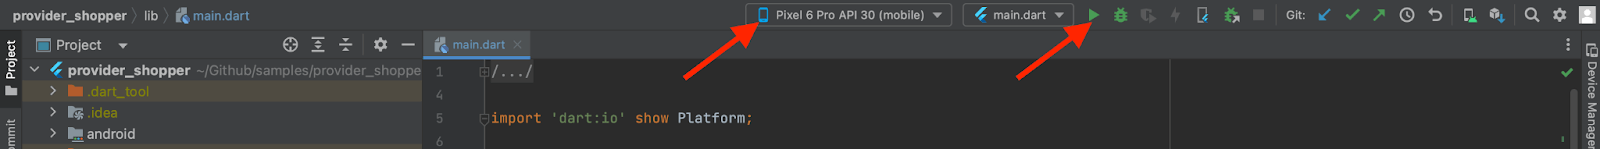 Android emulator name from the dropdown box